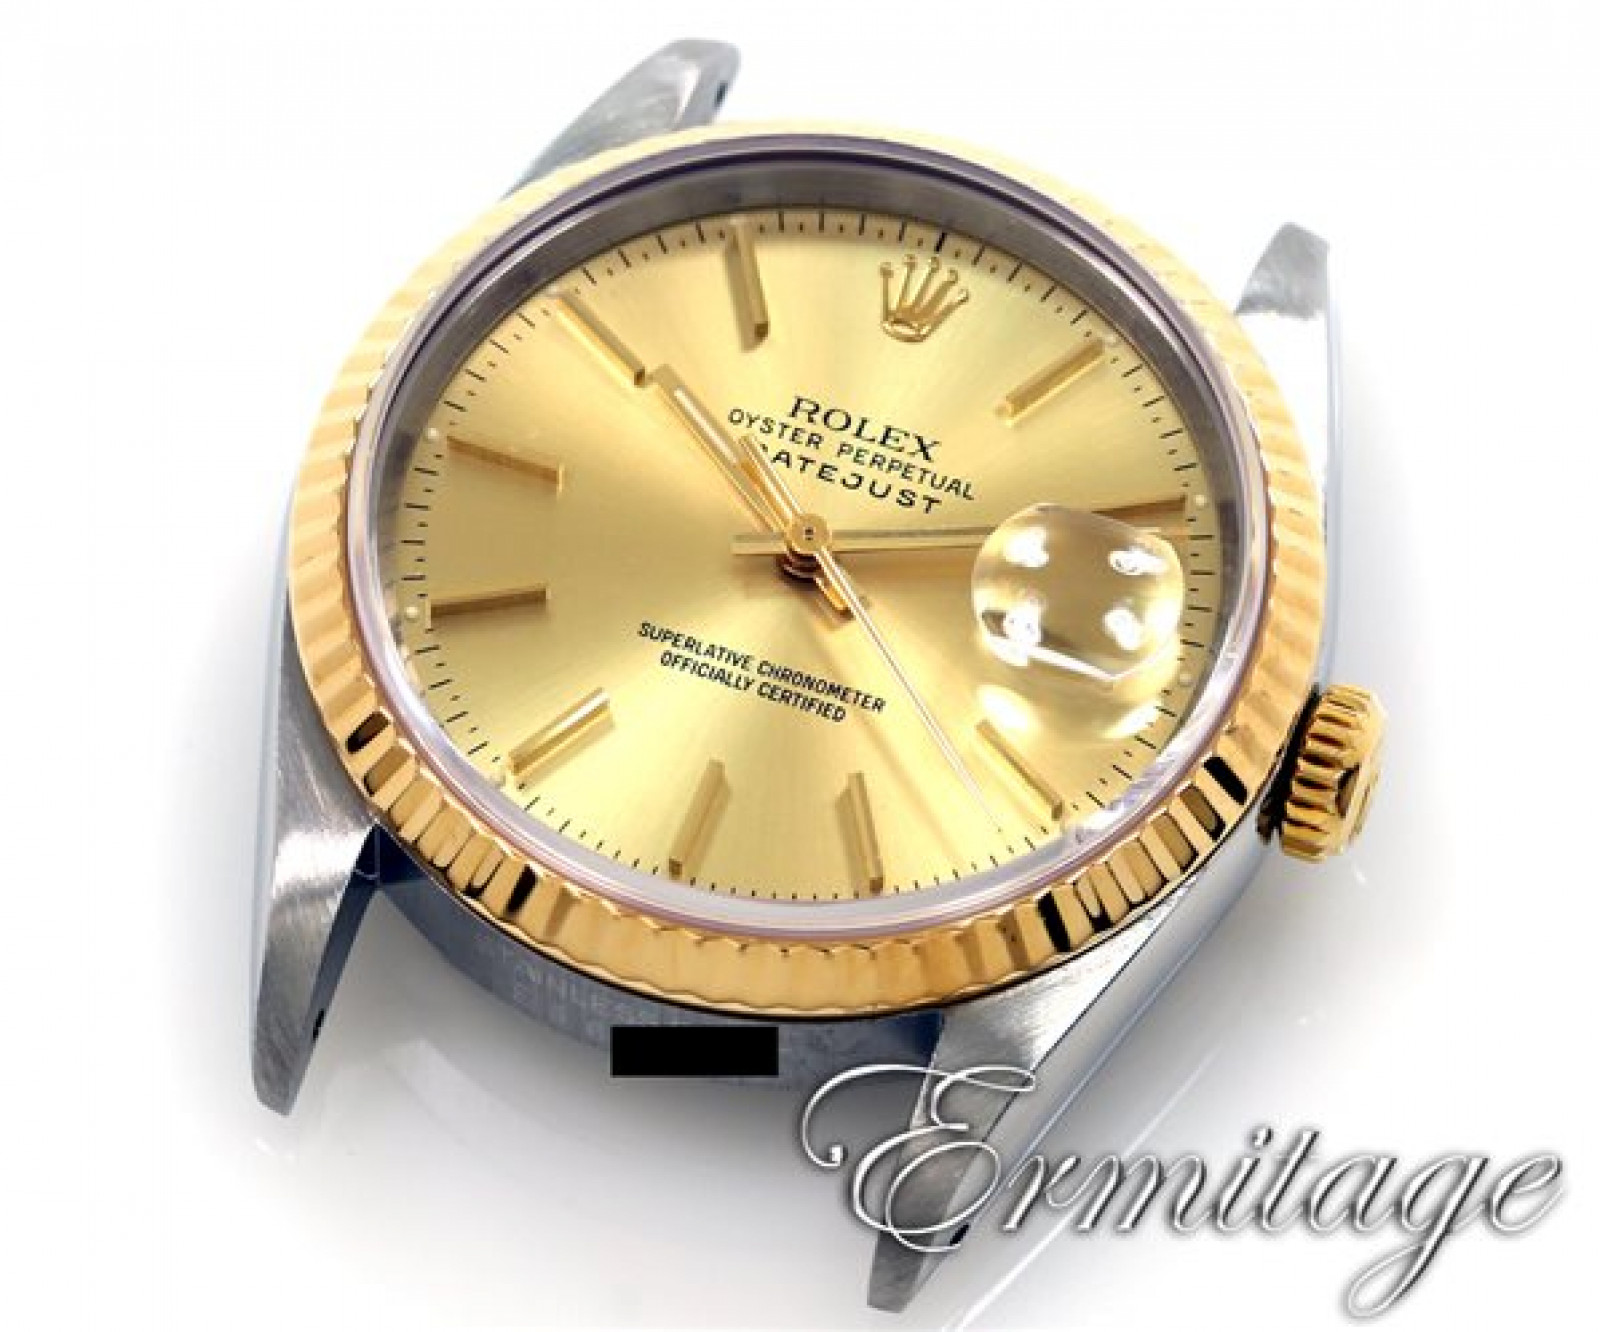 Sell Rolex Datejust 16233 for Top Price